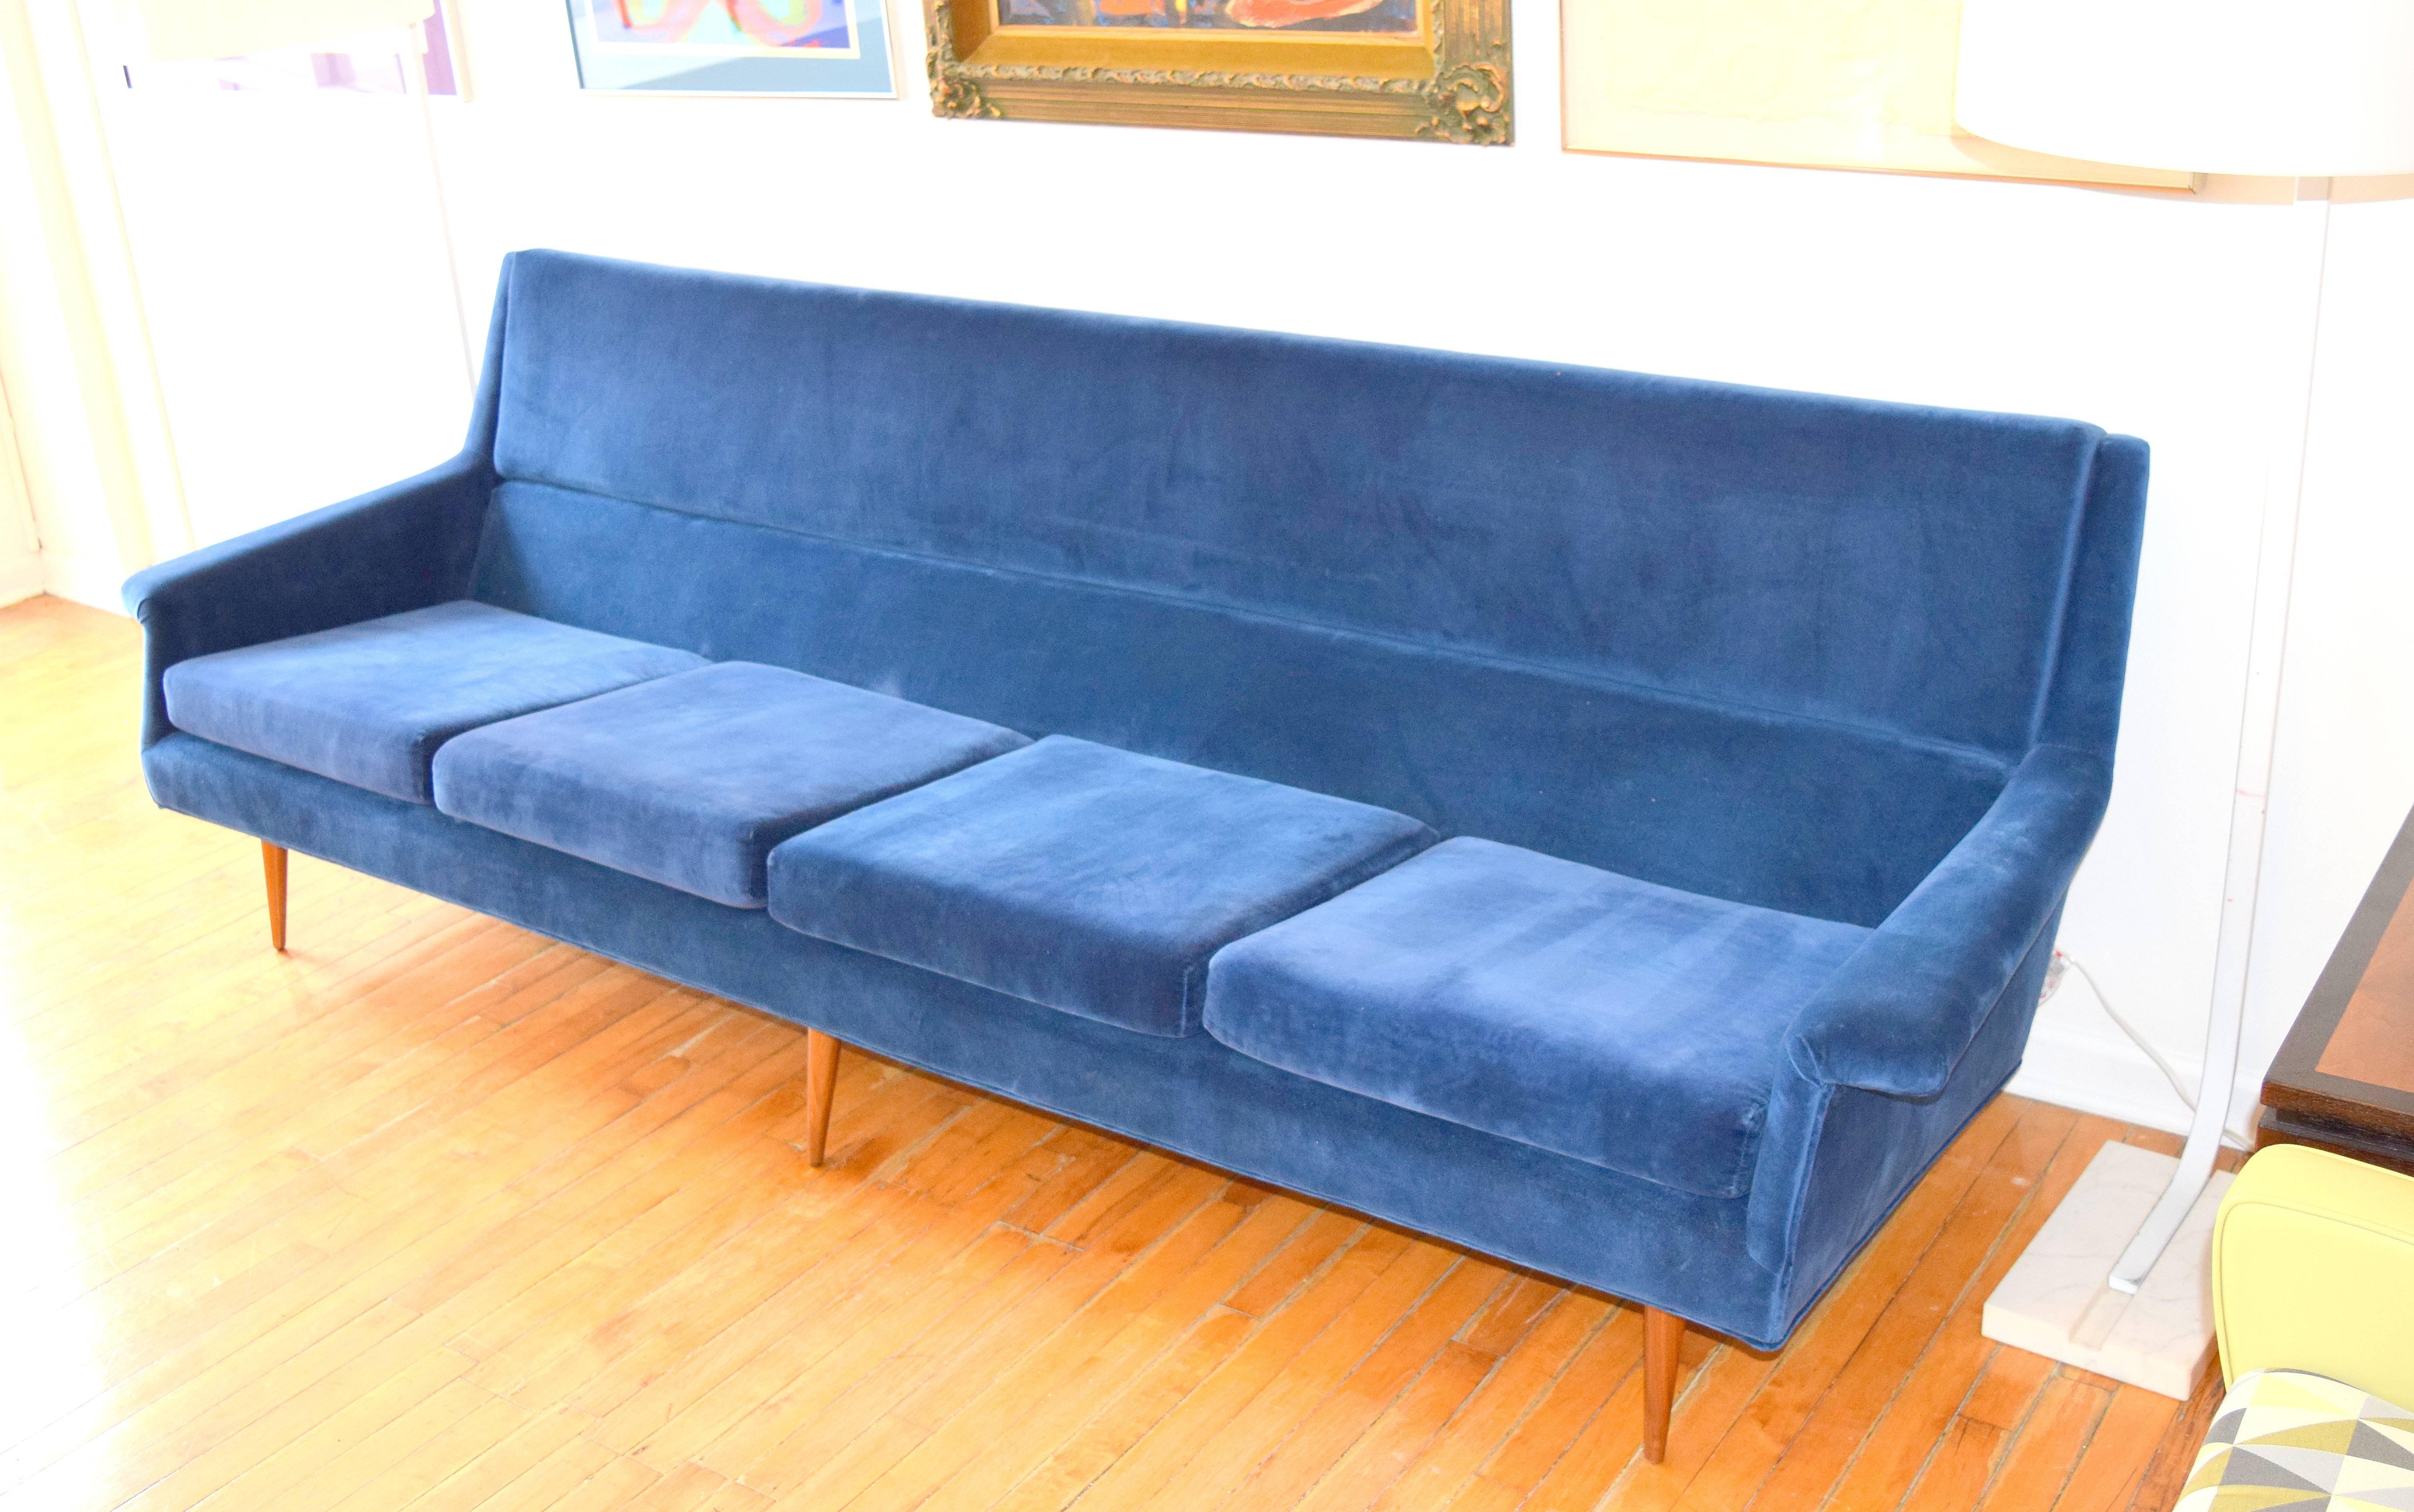 Striking angular sofa by Milo Baughman for Thayer Coggin. Wing like angular forms with tapered conical dowel legs, previously reupholstered in a royal blue velvet fabric. Long and sleek proportions with generous seating area yet extremely